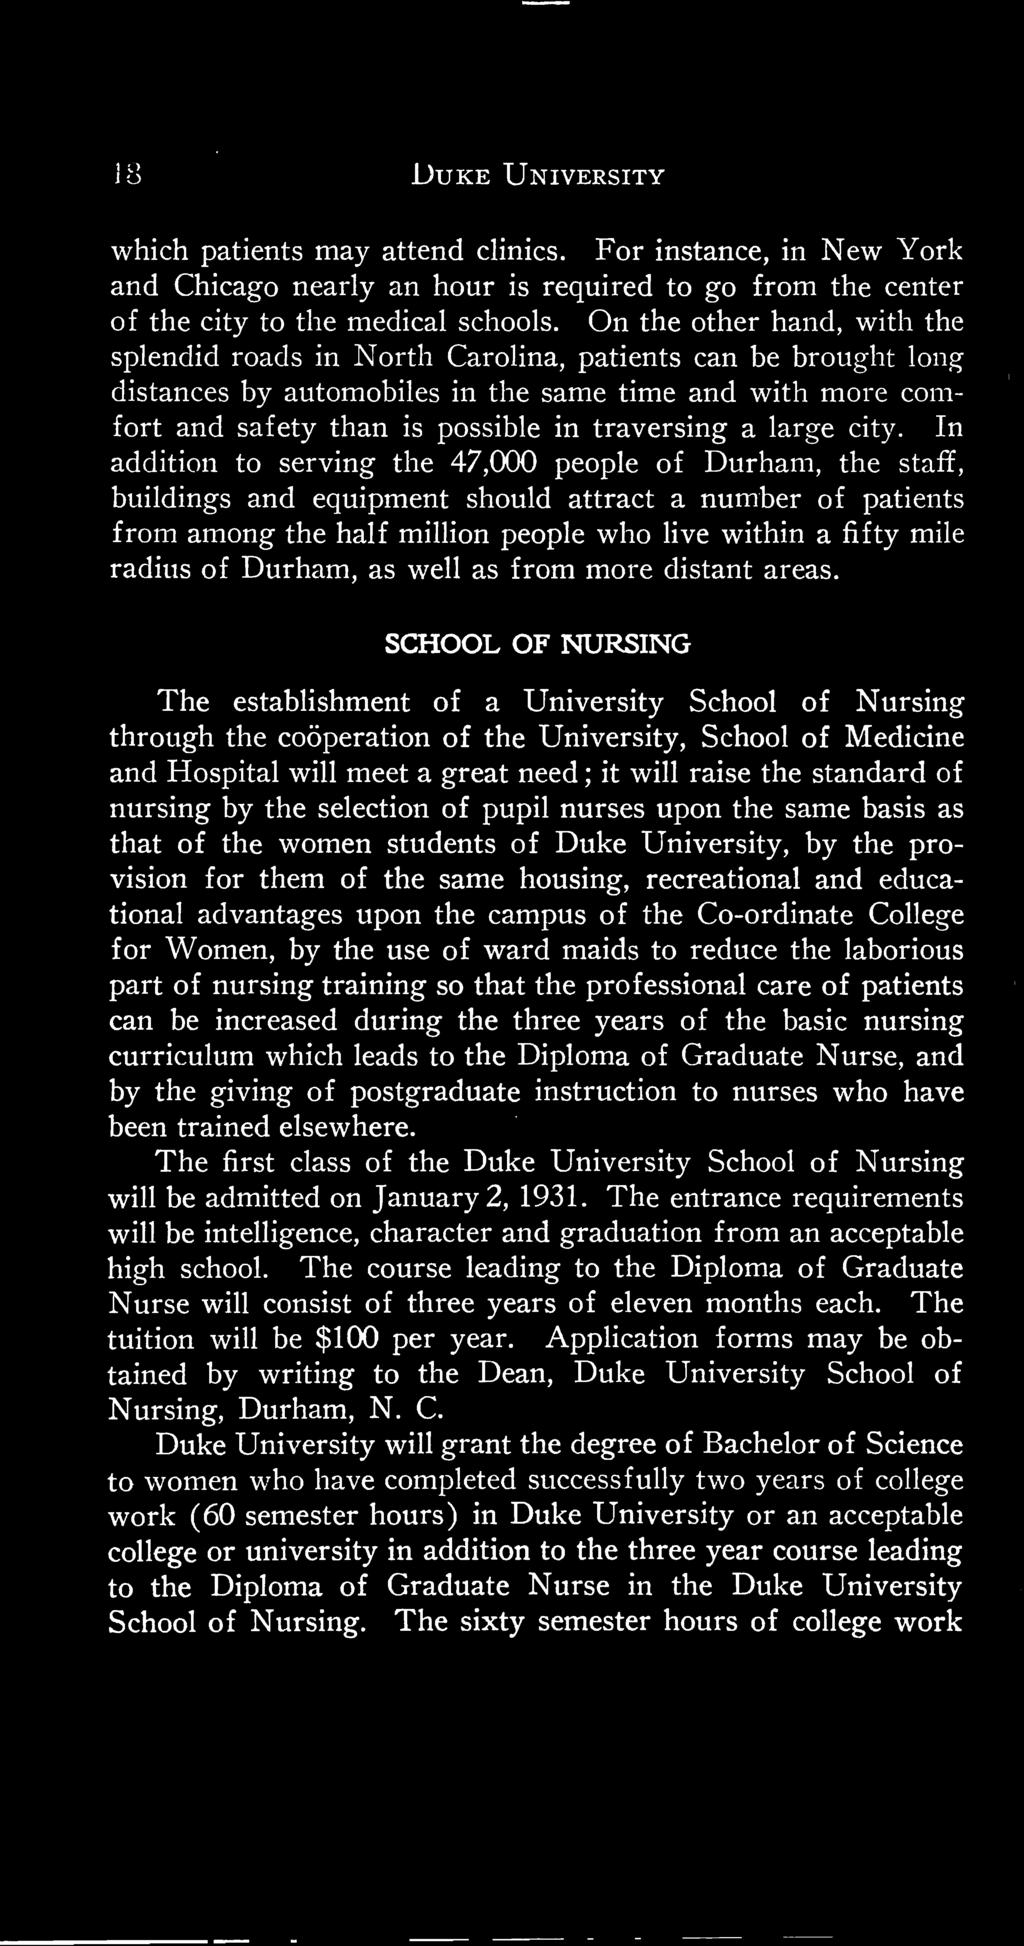 nursing by the selection of pupil nurses upon the same basis as that of the women students of Duke University, by the provision for them of the same housing, recreational and educational advantages